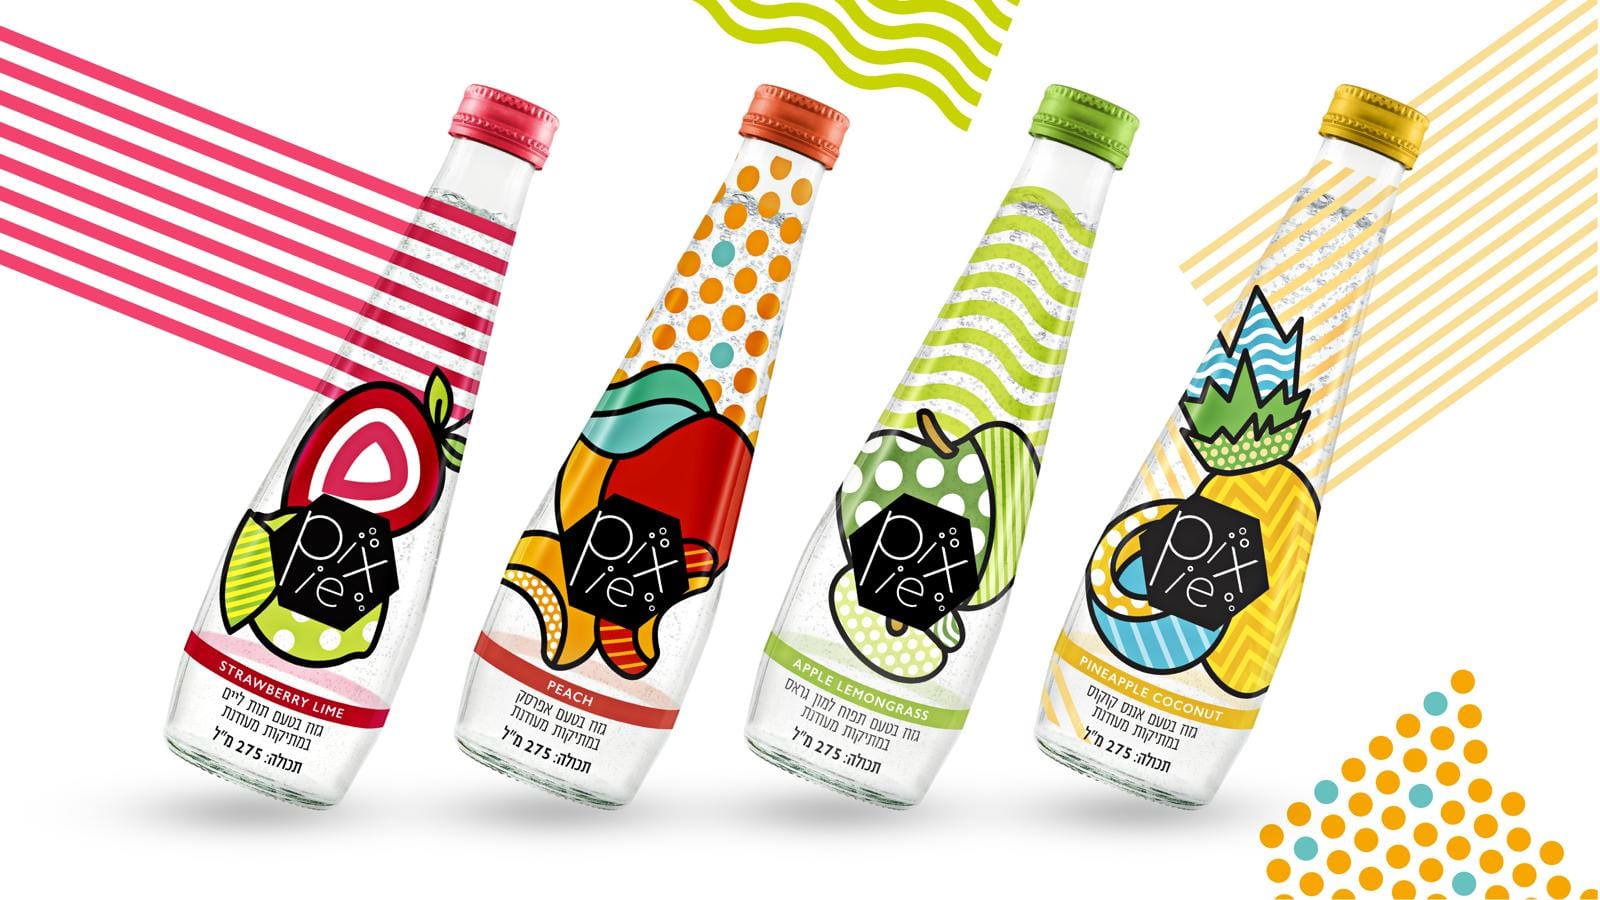 Package Design for Sparkling Water Brand Pixie